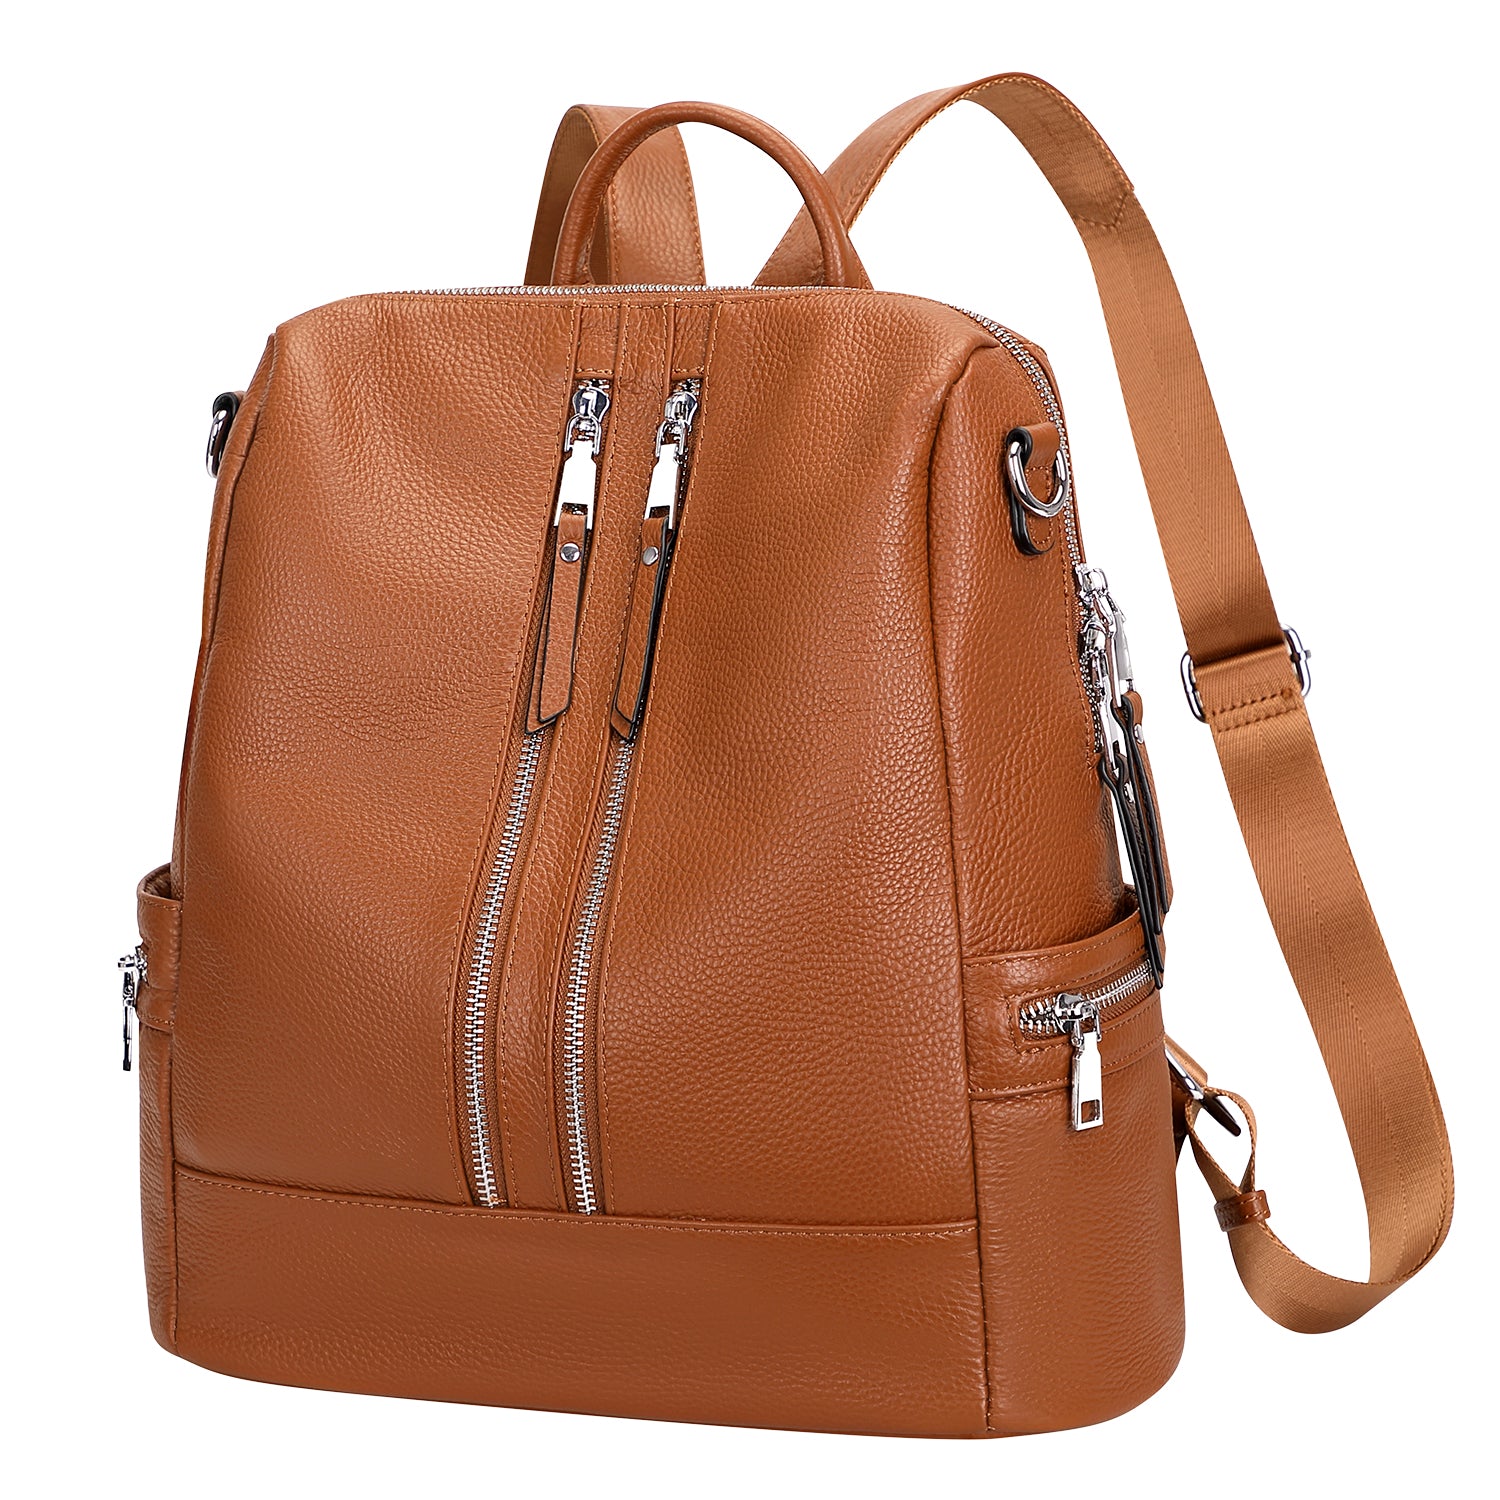 Womens Cool Leather Backpacks Brown Leather Travel Backpack Bag Purse –  igemstonejewelry